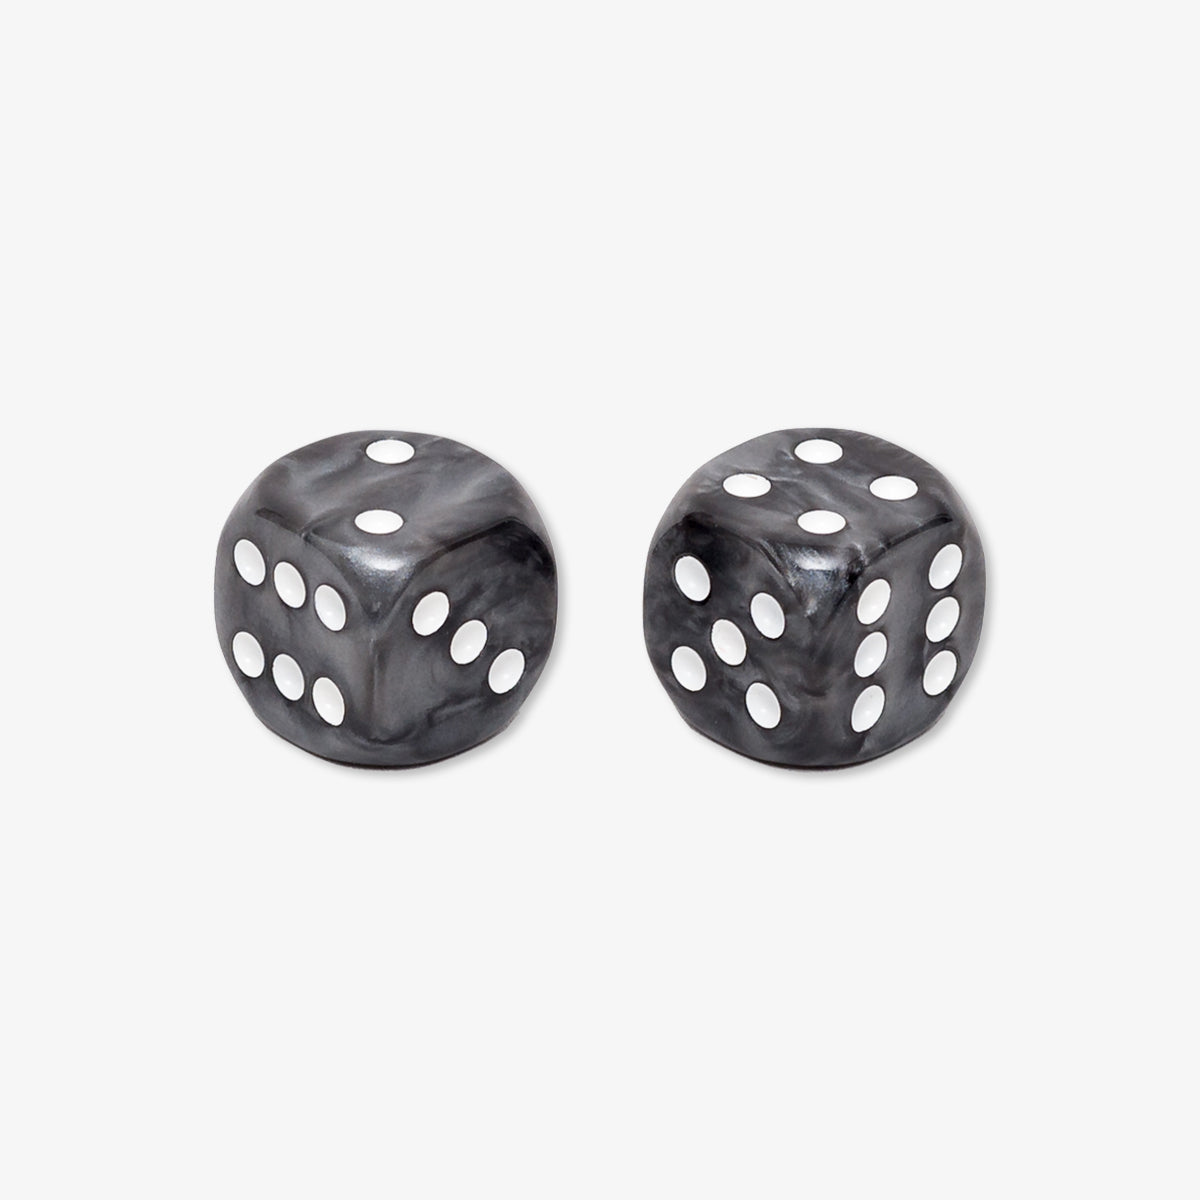 Backgammon Dice Resin Mother-of-Pearl 15 mm Grey